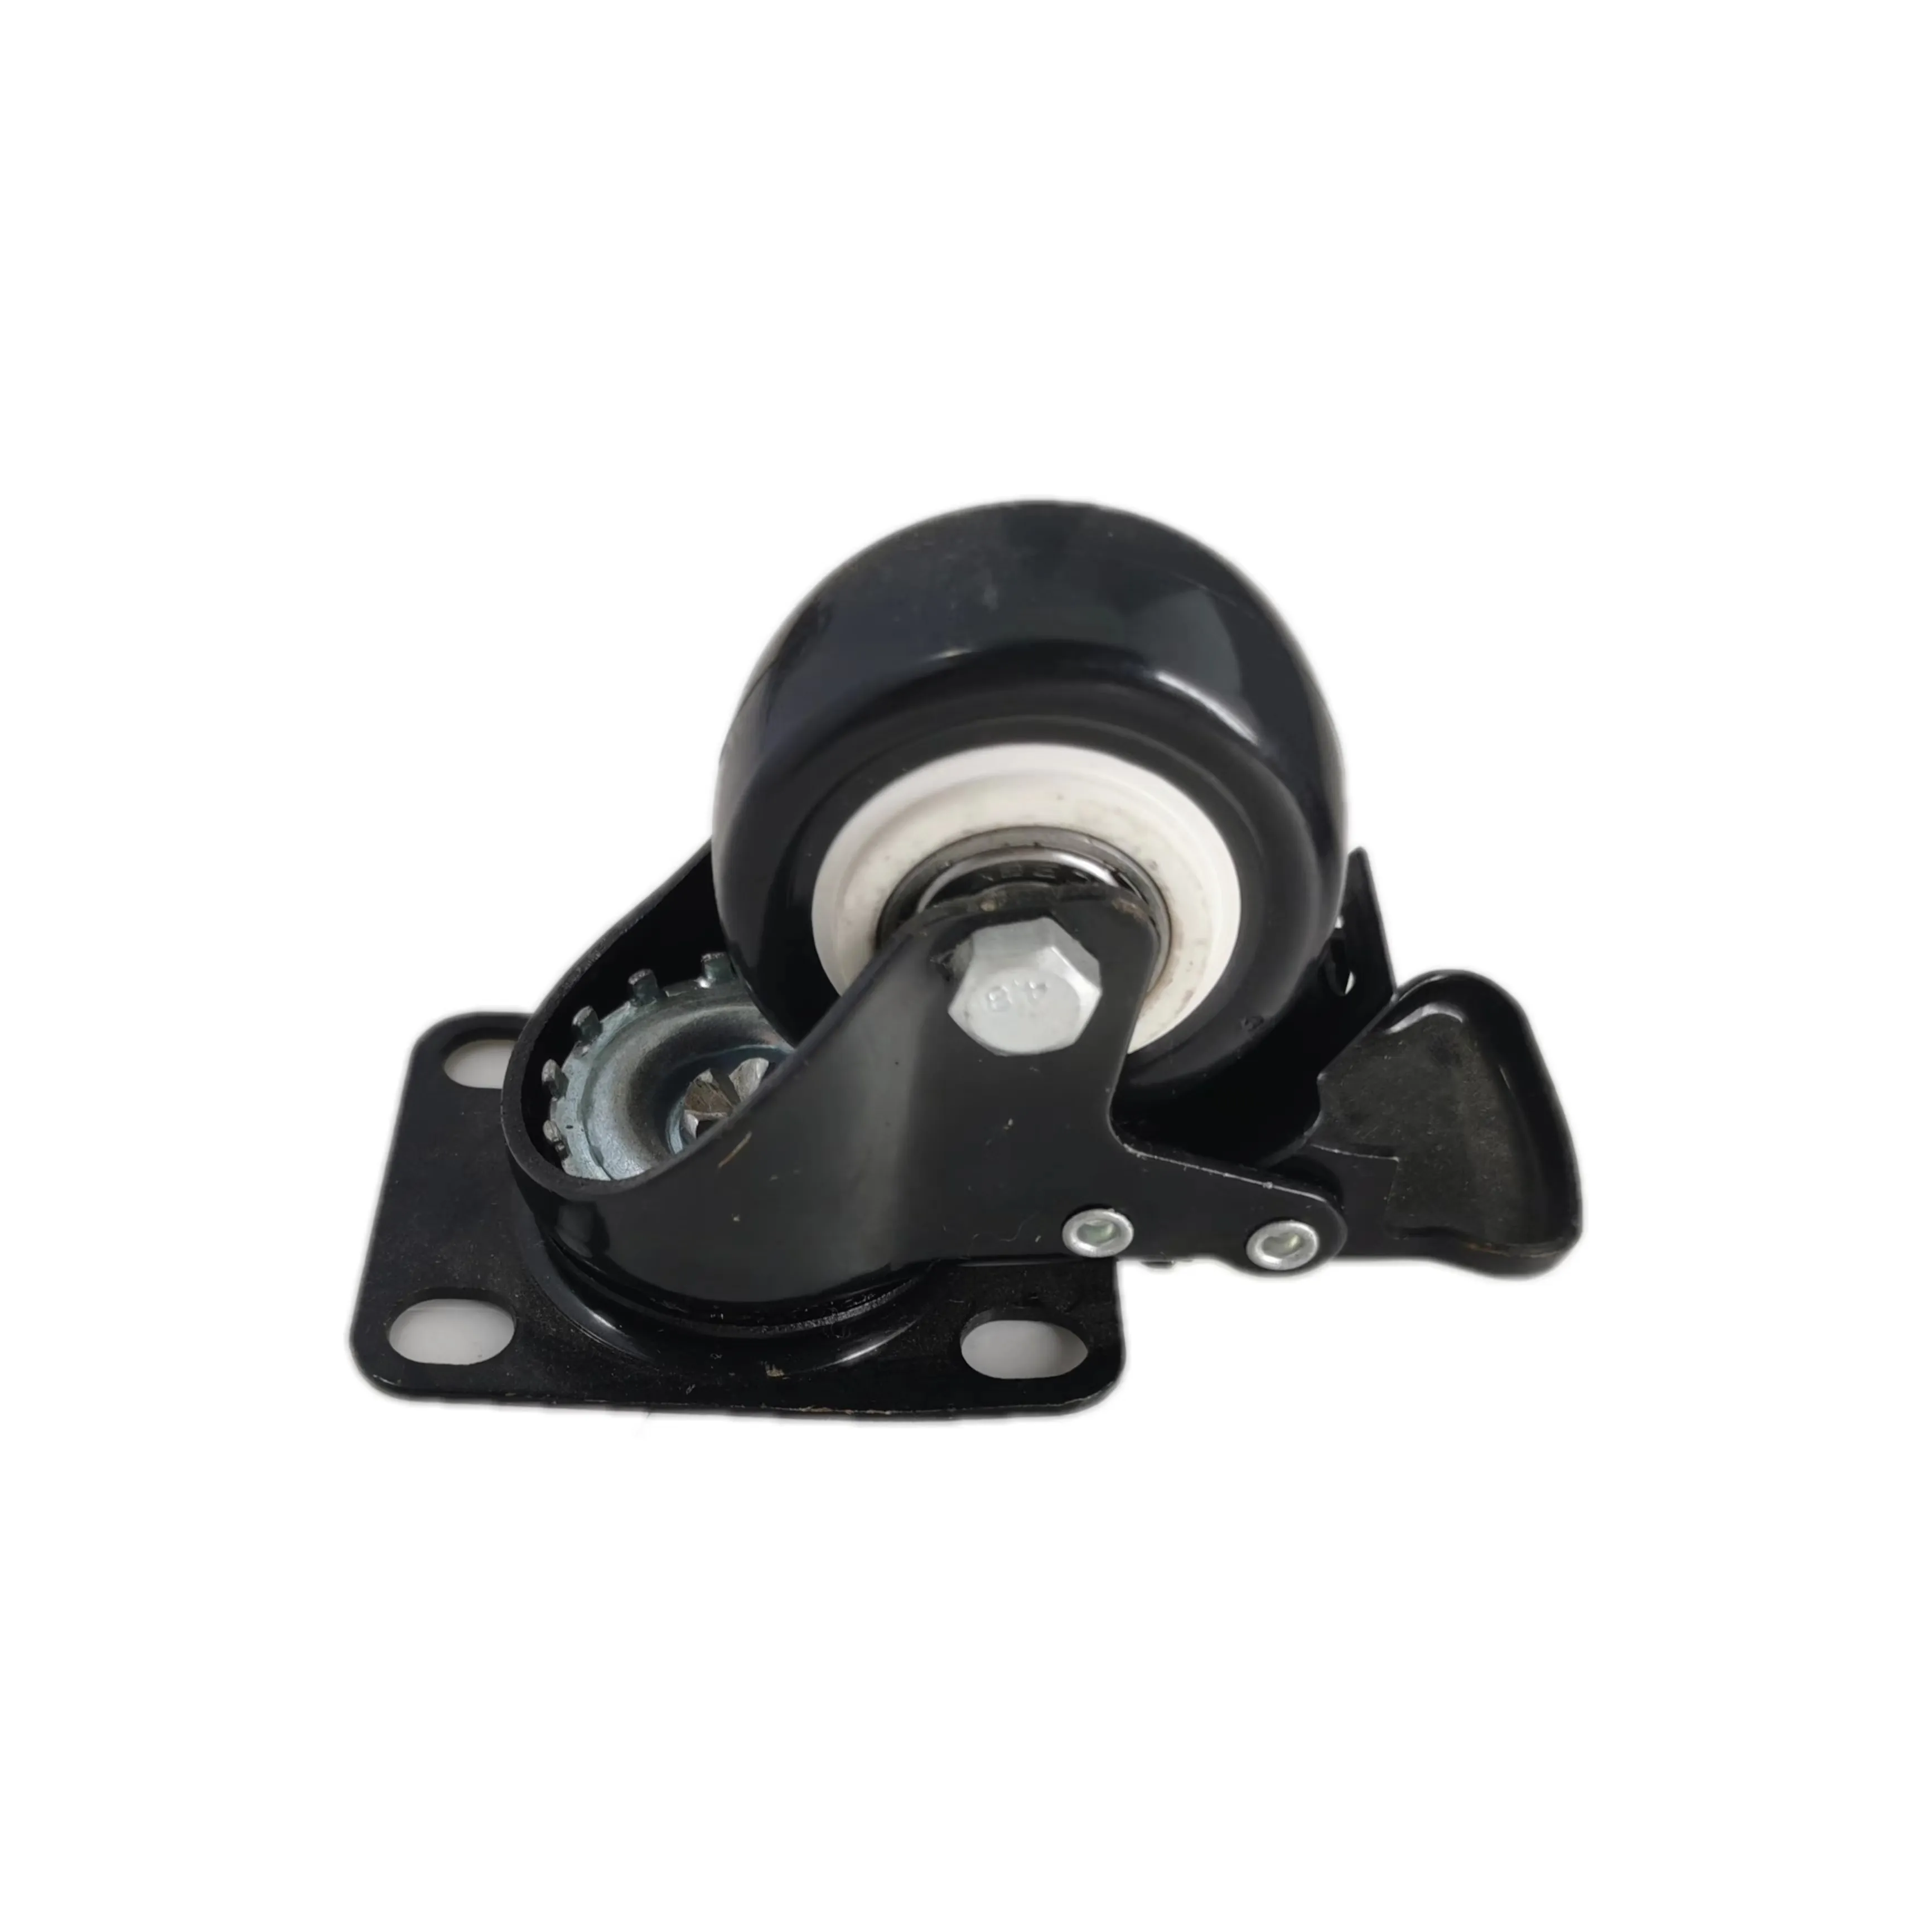 Kinnsbull low profile casters and wheels decorative furniture casters furniture leg casters